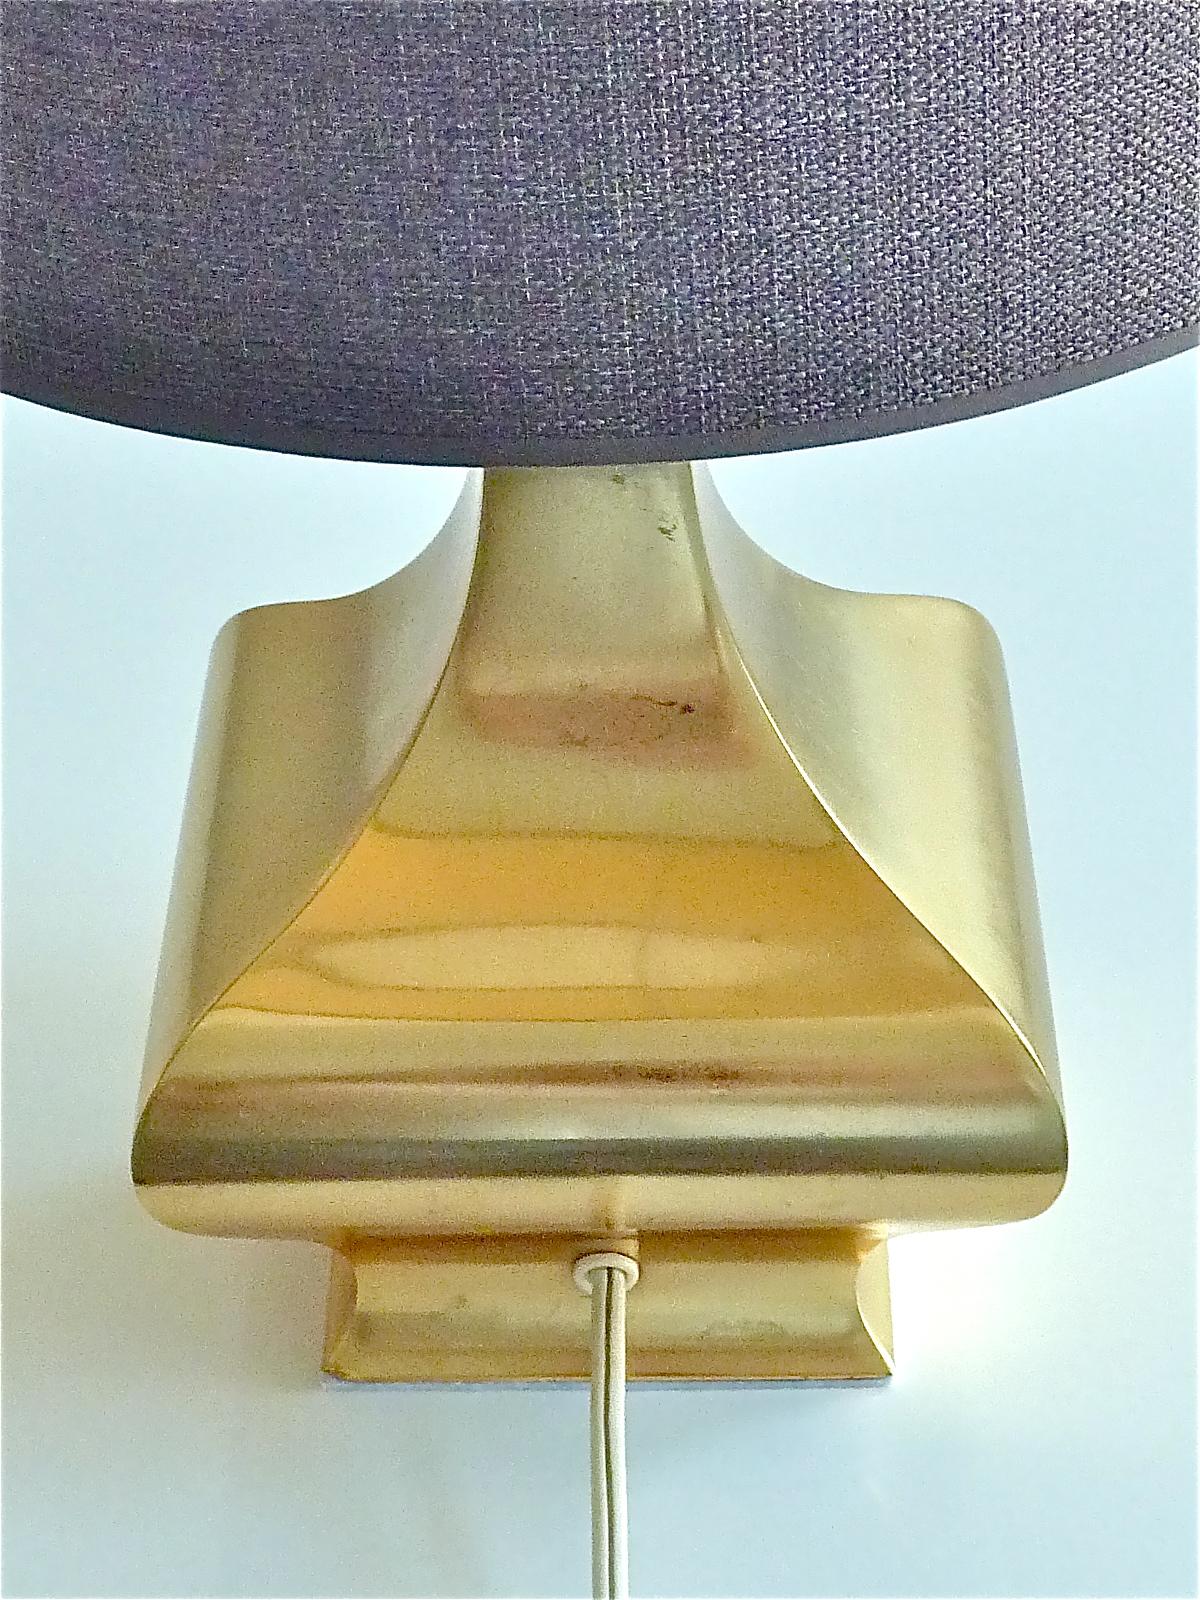 Rare Pair Maria Pergay Midcentury Table Lamps Gilt Brass Steel Metal France 1970 For Sale 7